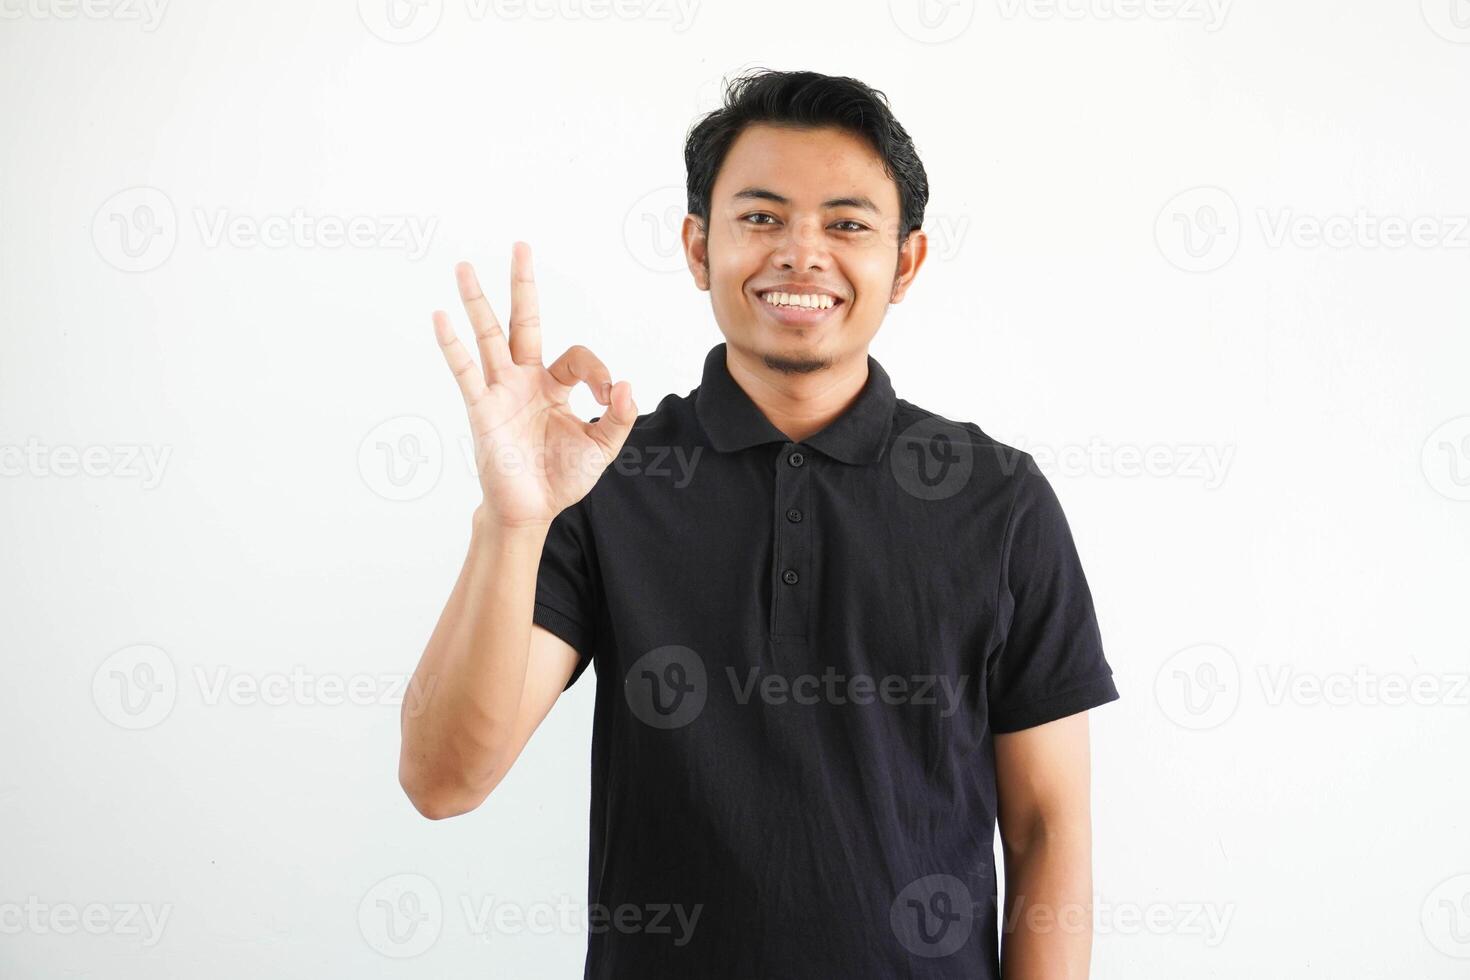 young Asian man smiling friendly while giving OK finger sign wearing black polo t shirt isolated on white background photo